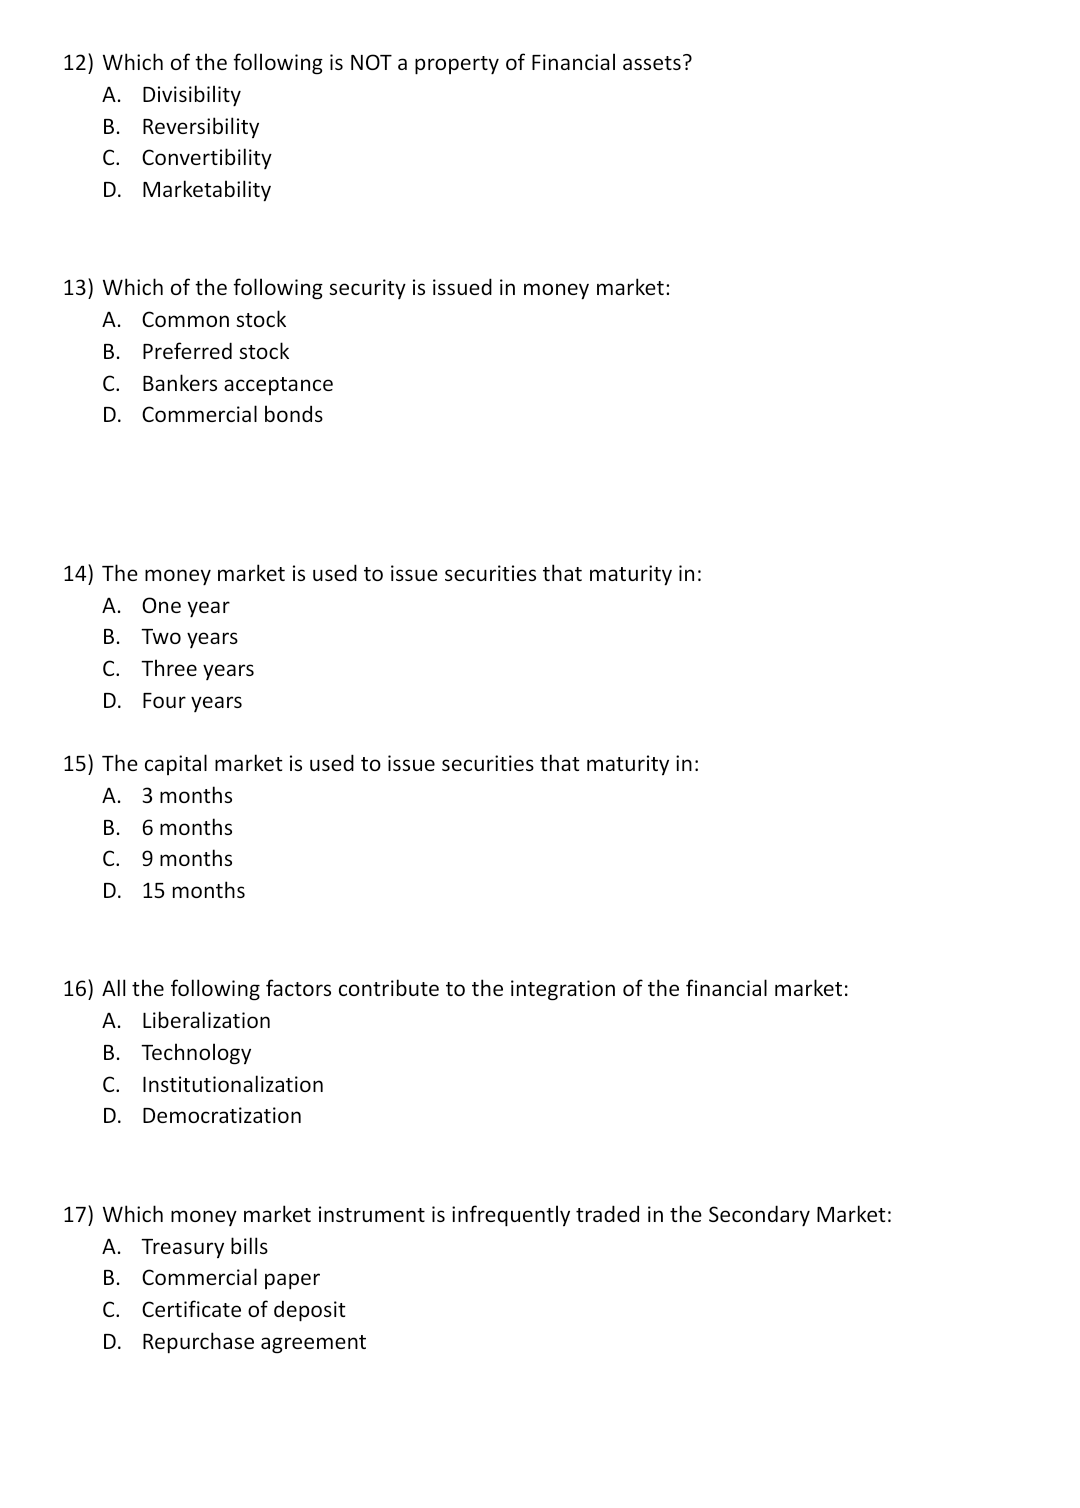 12) Which of the following is NOT a property of Financial assets?
A. Divisibility
B. Reversibility
C. Convertibility
D. Marketability
13) Which of the following security is issued in money market:
A. Common stock
B. Preferred stock
C. Bankers acceptance
D. Commercial bonds
14) The money market is used to issue securities that maturity in:
A. One year
B. Two years
C. Three years
D. Four years
15) The capital market is used to issue securities that maturity in:
A. 3 months
B. 6 months
C. 9 months
D. 15 months
16) All the following factors contribute to the integration of the financial market:
A. Liberalization
B. Technology
C. Institutionalization
D. Democratization
17) Which money market instrument is infrequently traded in the Secondary Market:
A. Treasury bills
B. Commercial paper
C. Certificate of deposit
D. Repurchase agreement
